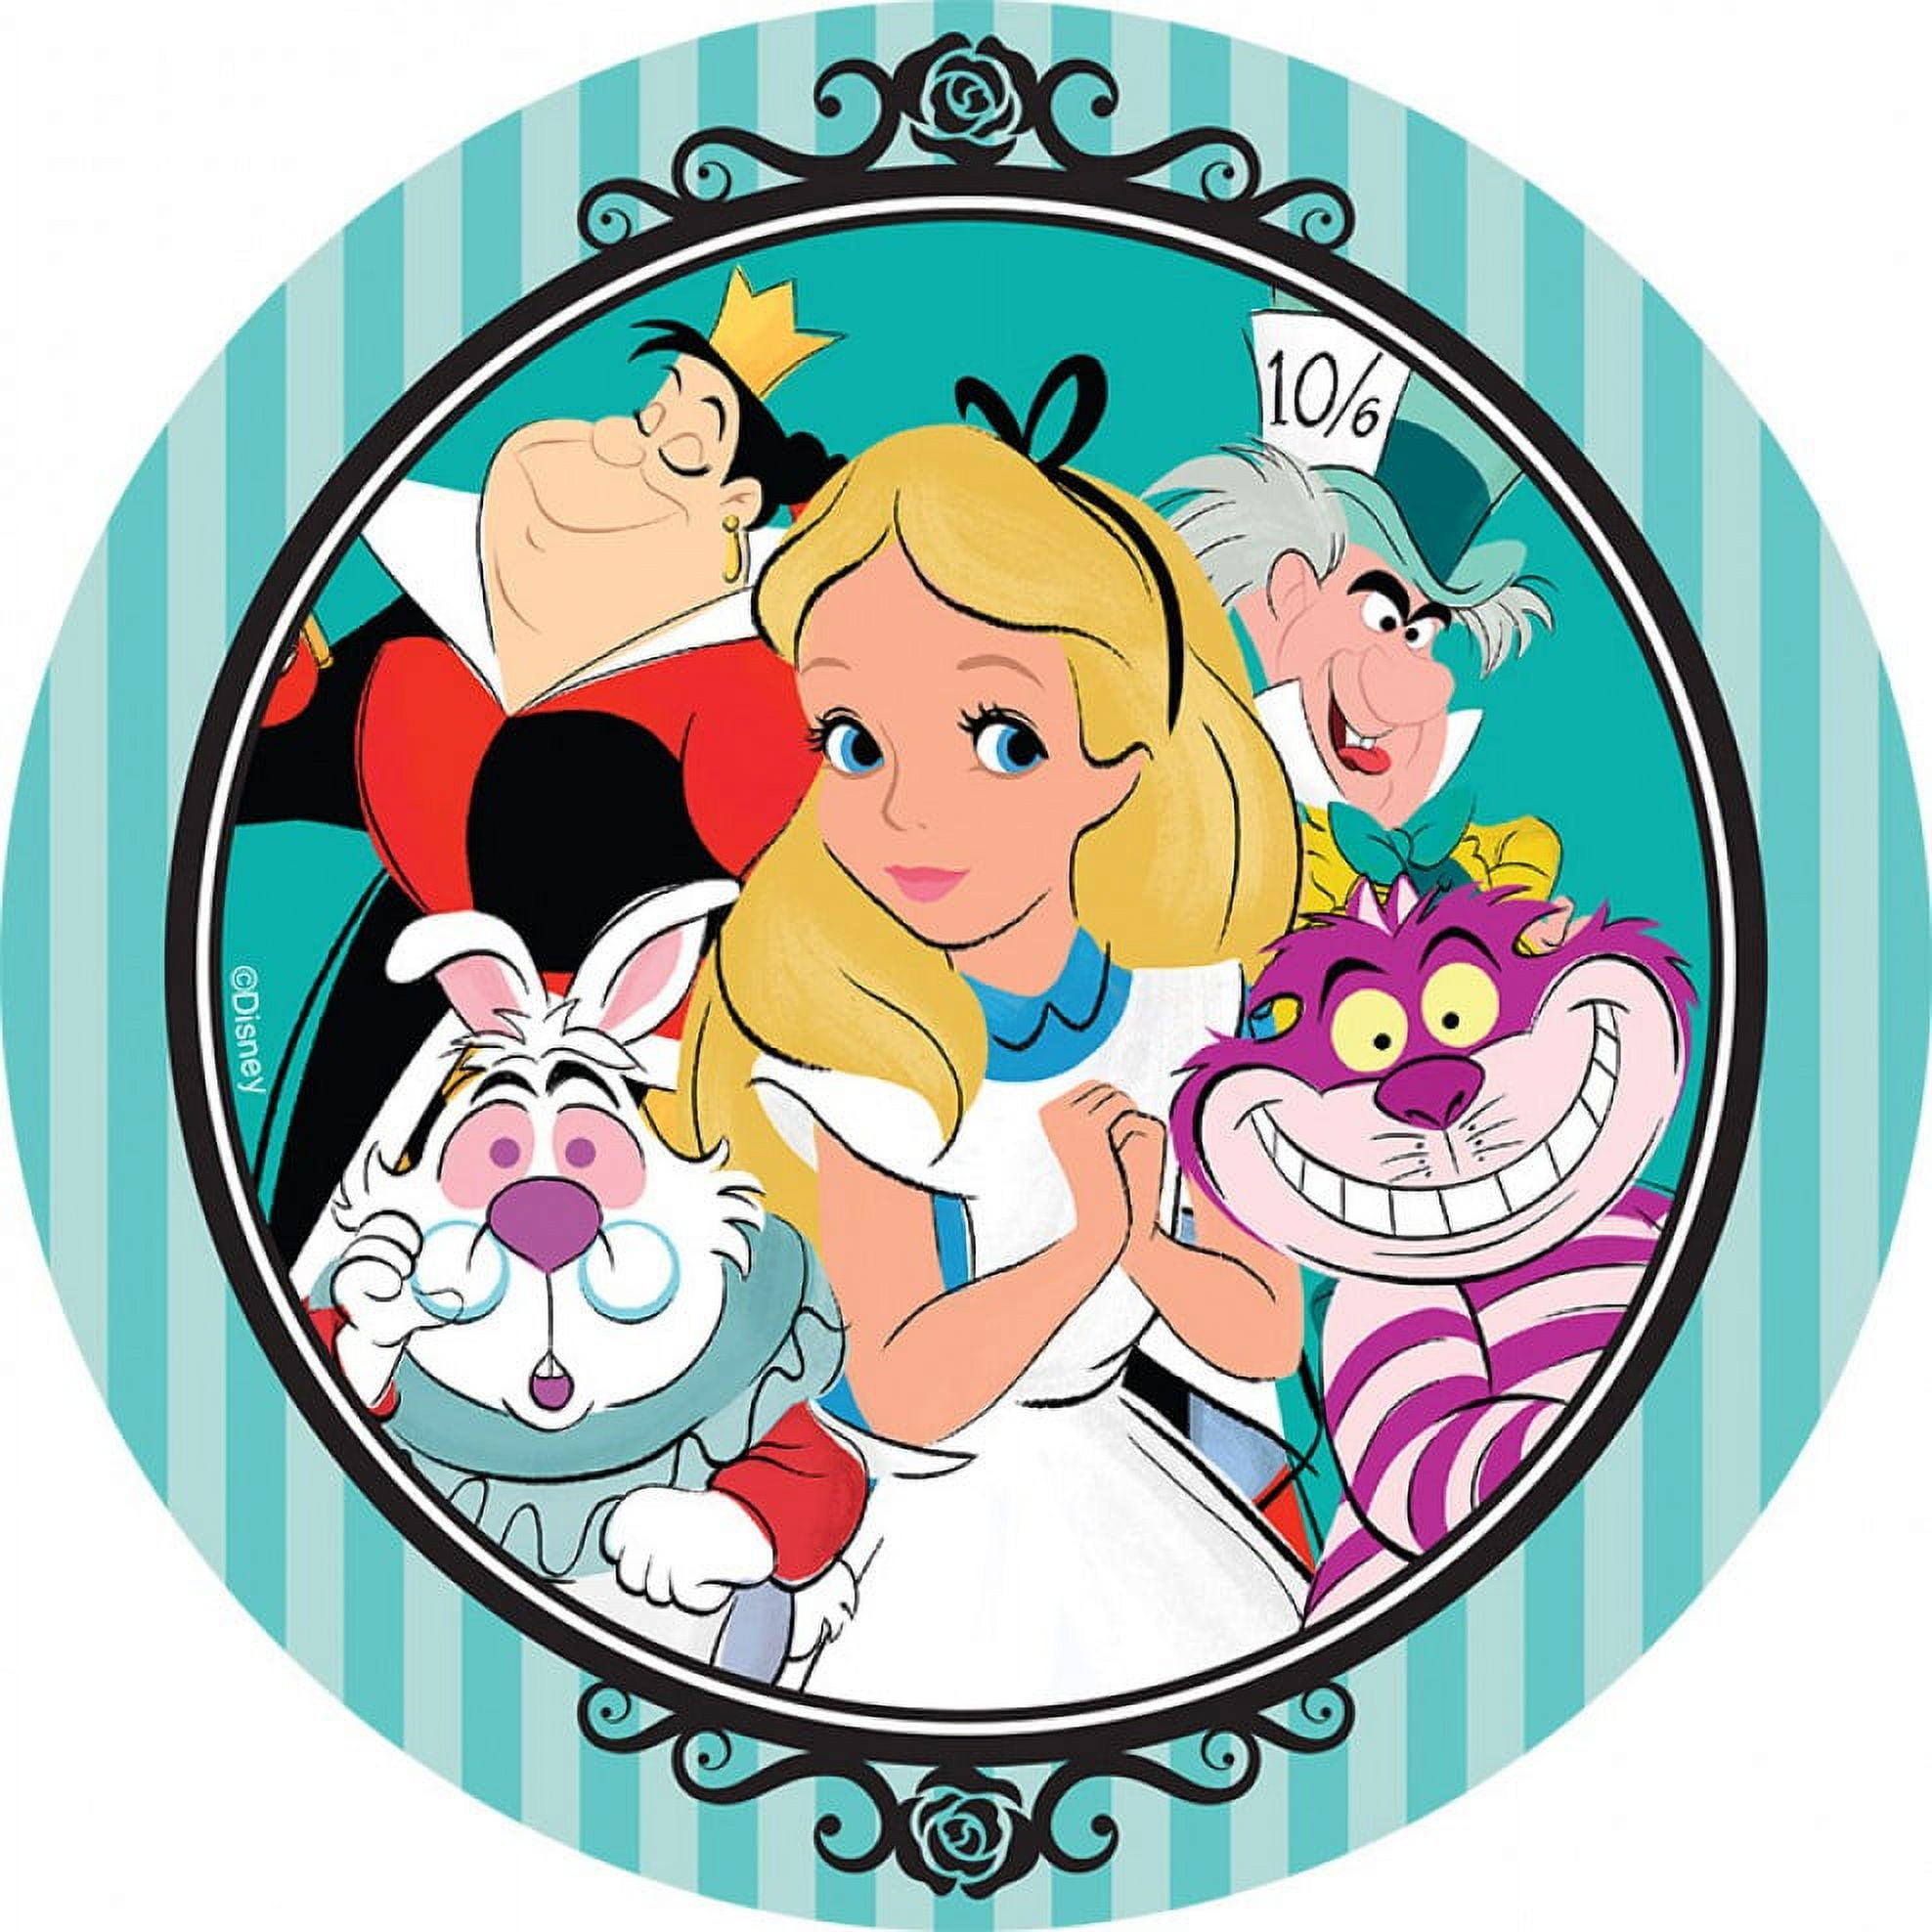 8 Round Alice in Wonderland Image Edible Frosting Cake Topper ABPID21977 